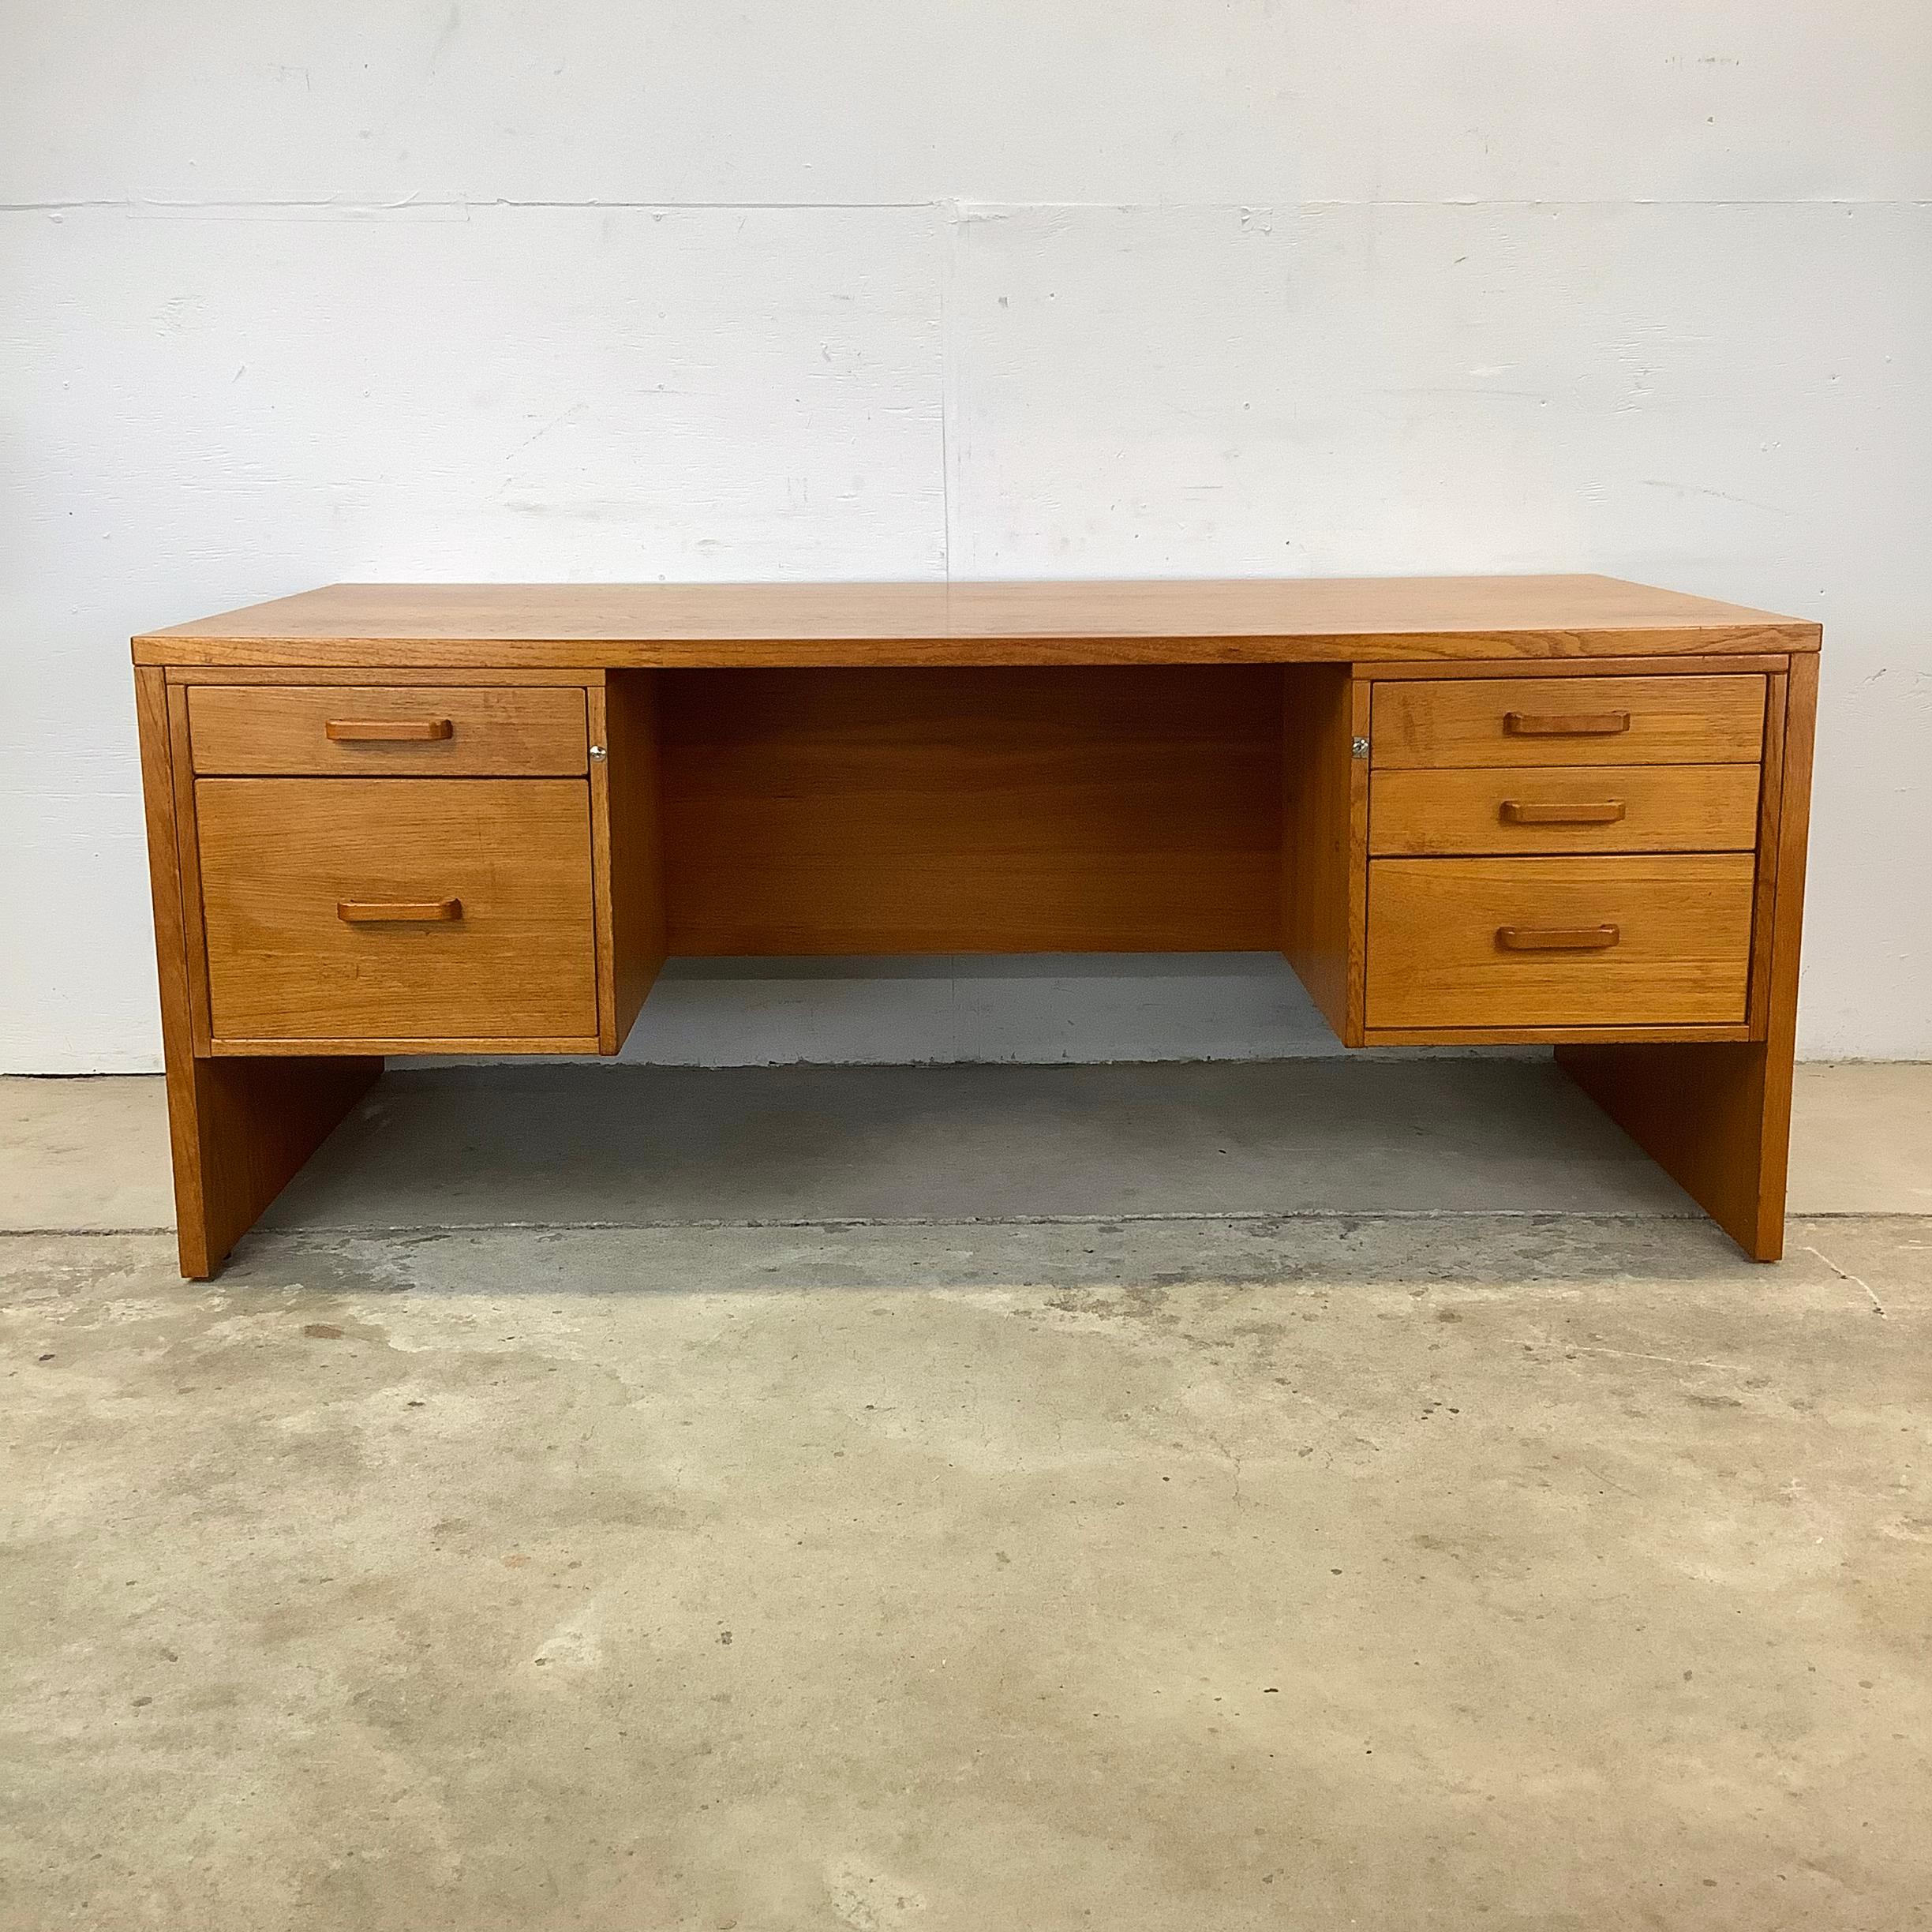 This Vintage Scandinavian Modern Teak Executive Desk from Jesper Furniture makes a timeless masterpiece that combines elegant design with exceptional craftsmanship. Crafted with rich teak finish, this executive desk exudes warmth and sophistication,